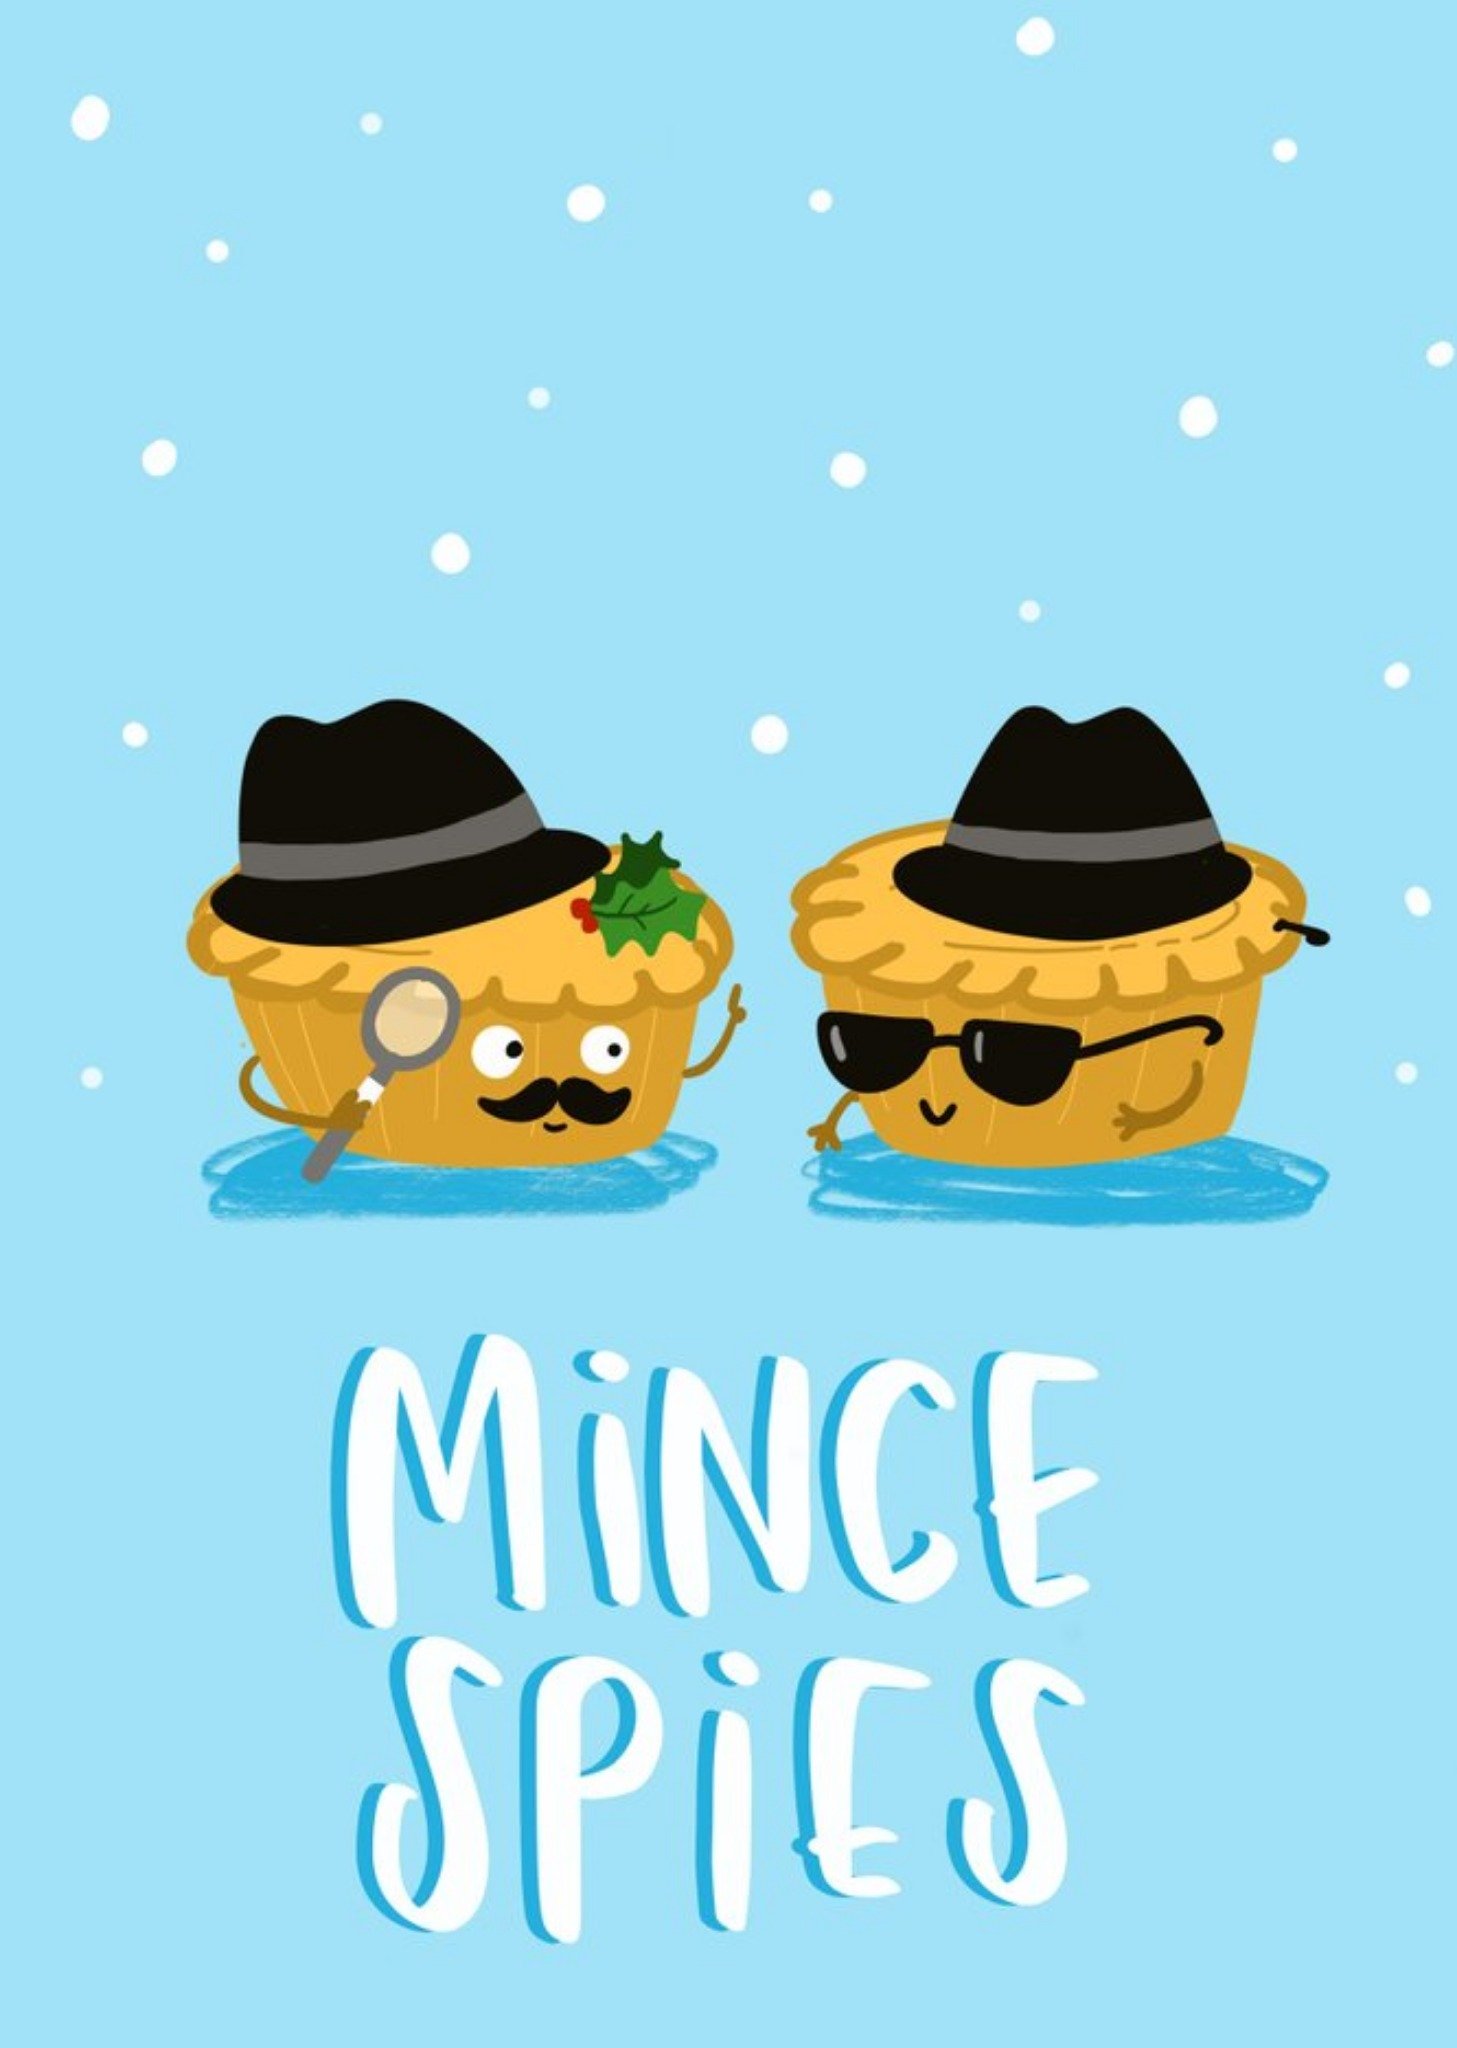 Moonpig Mince Spies Pies Funny Christmas Card Ecard